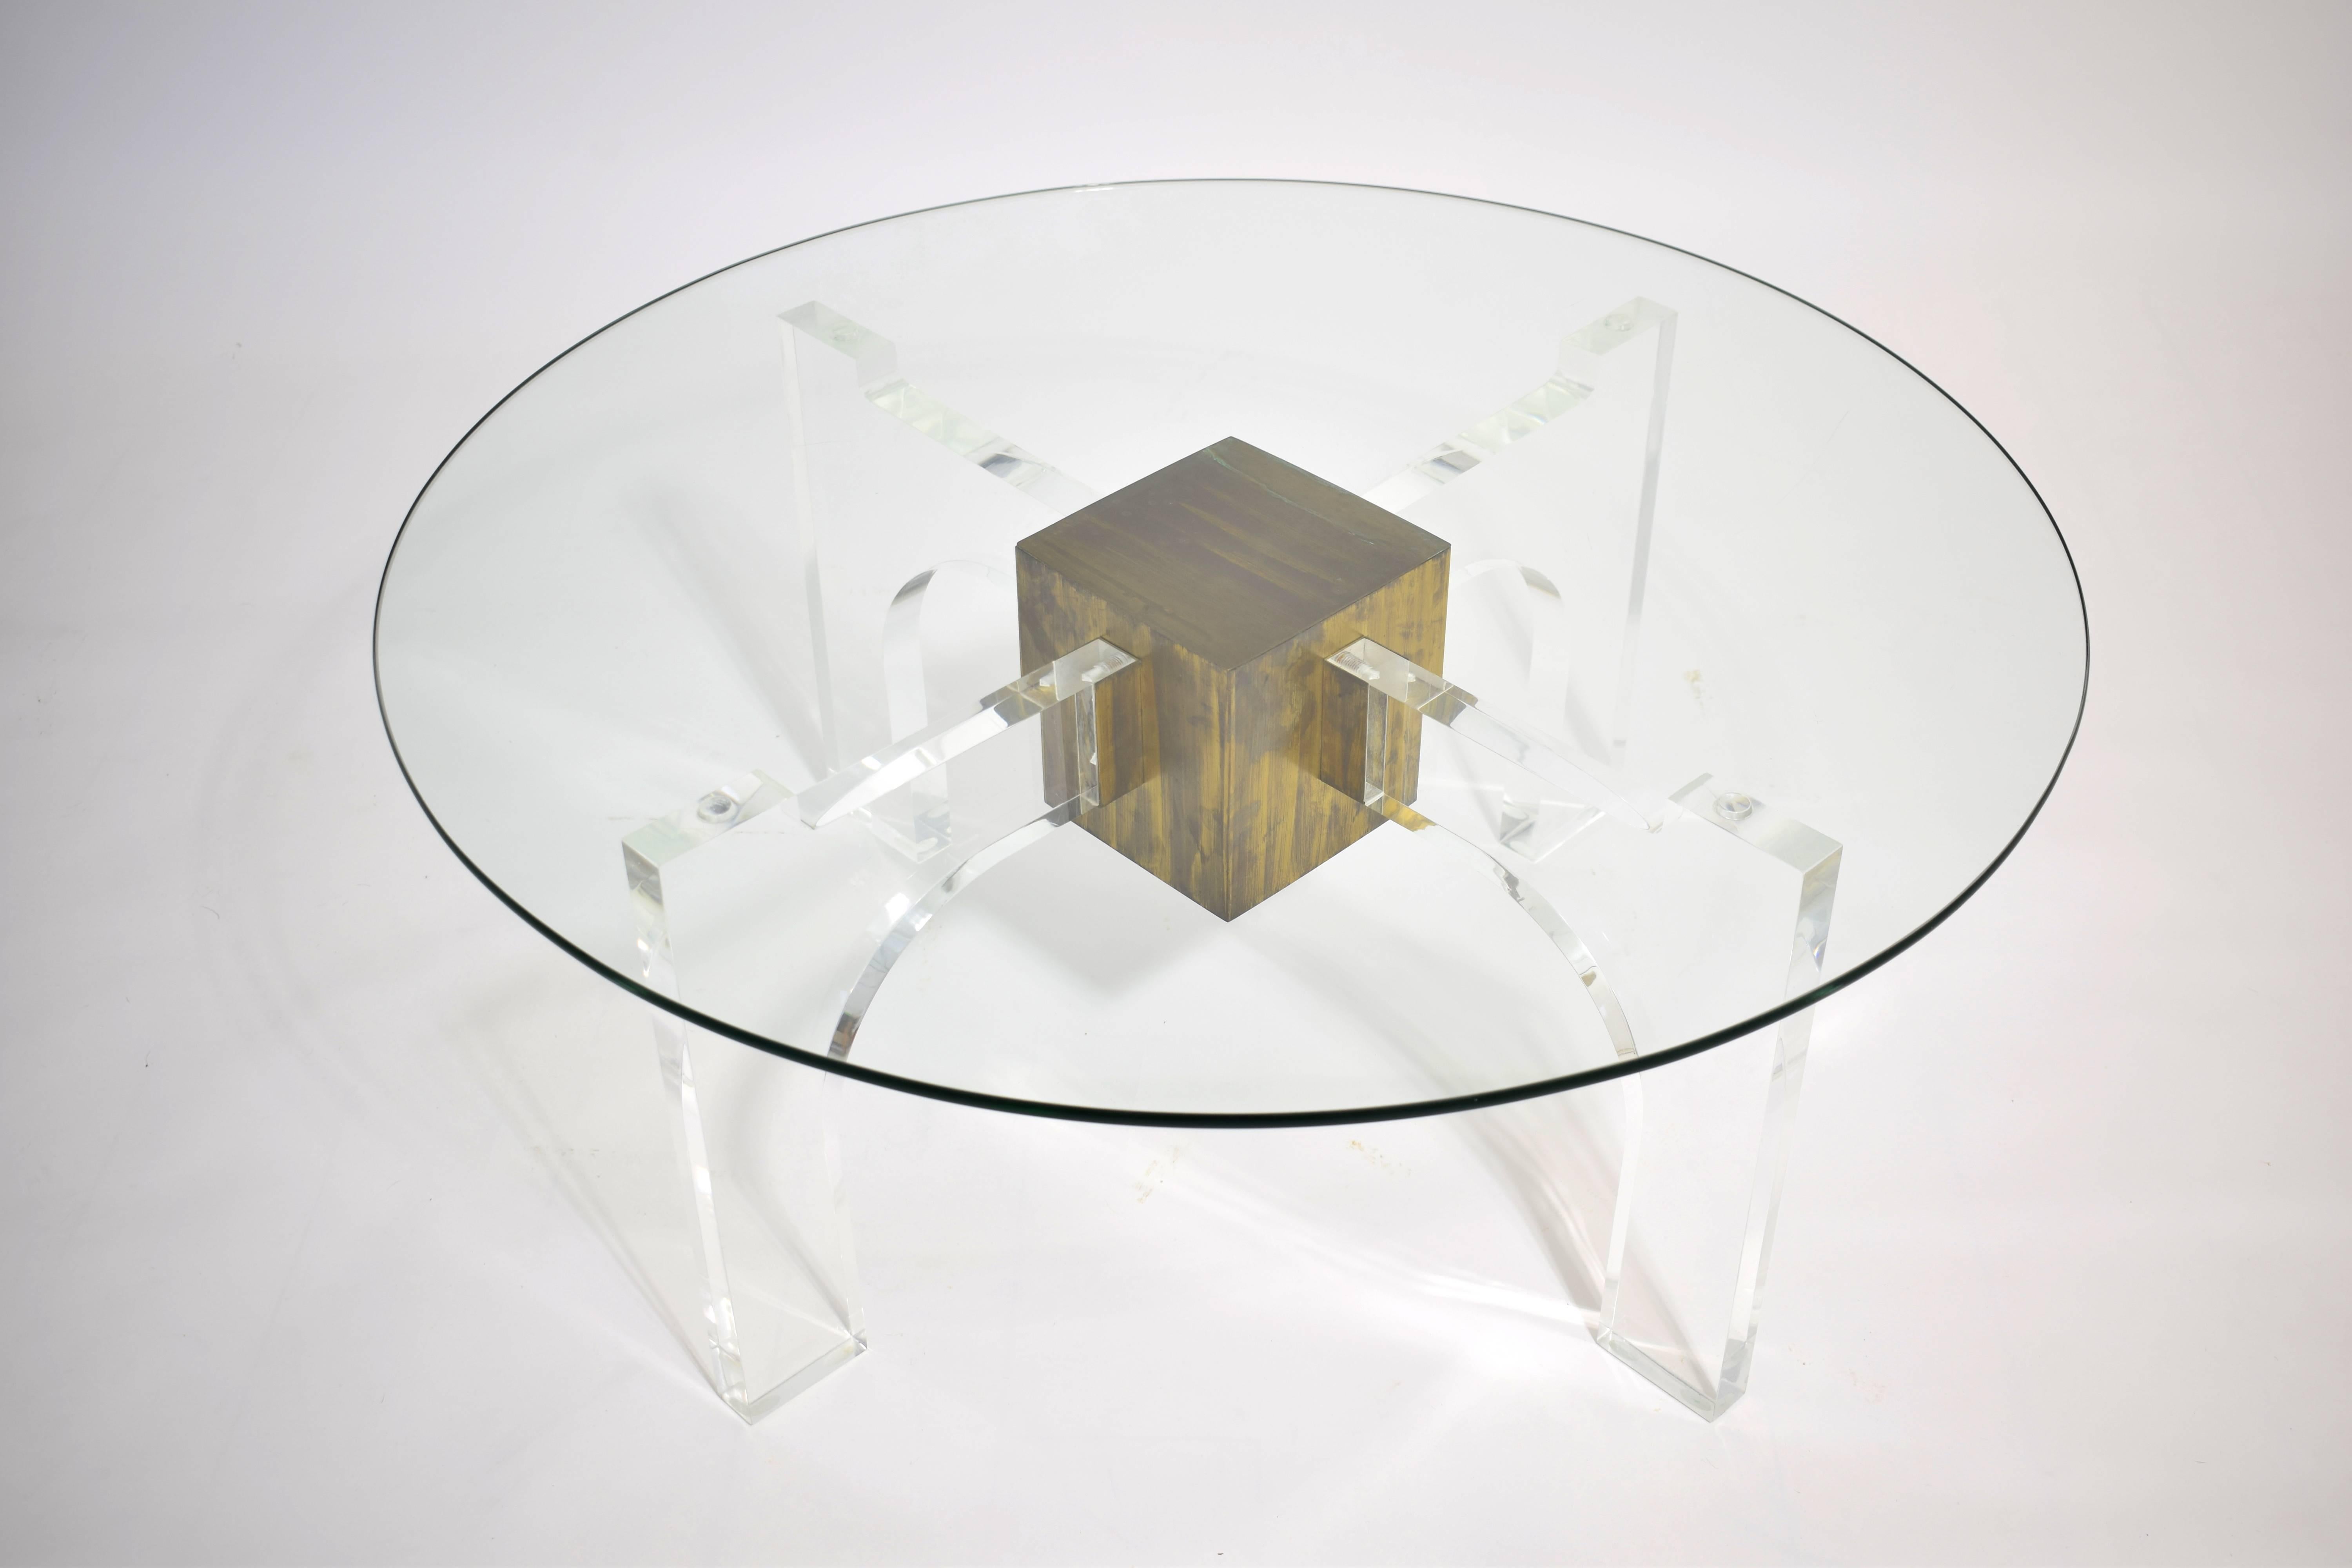 Gorgeous 20th century cocktail table with thick Lucite base, central patinated brass cube and quality glass top.

Please contact us directly for an international shipping quote.